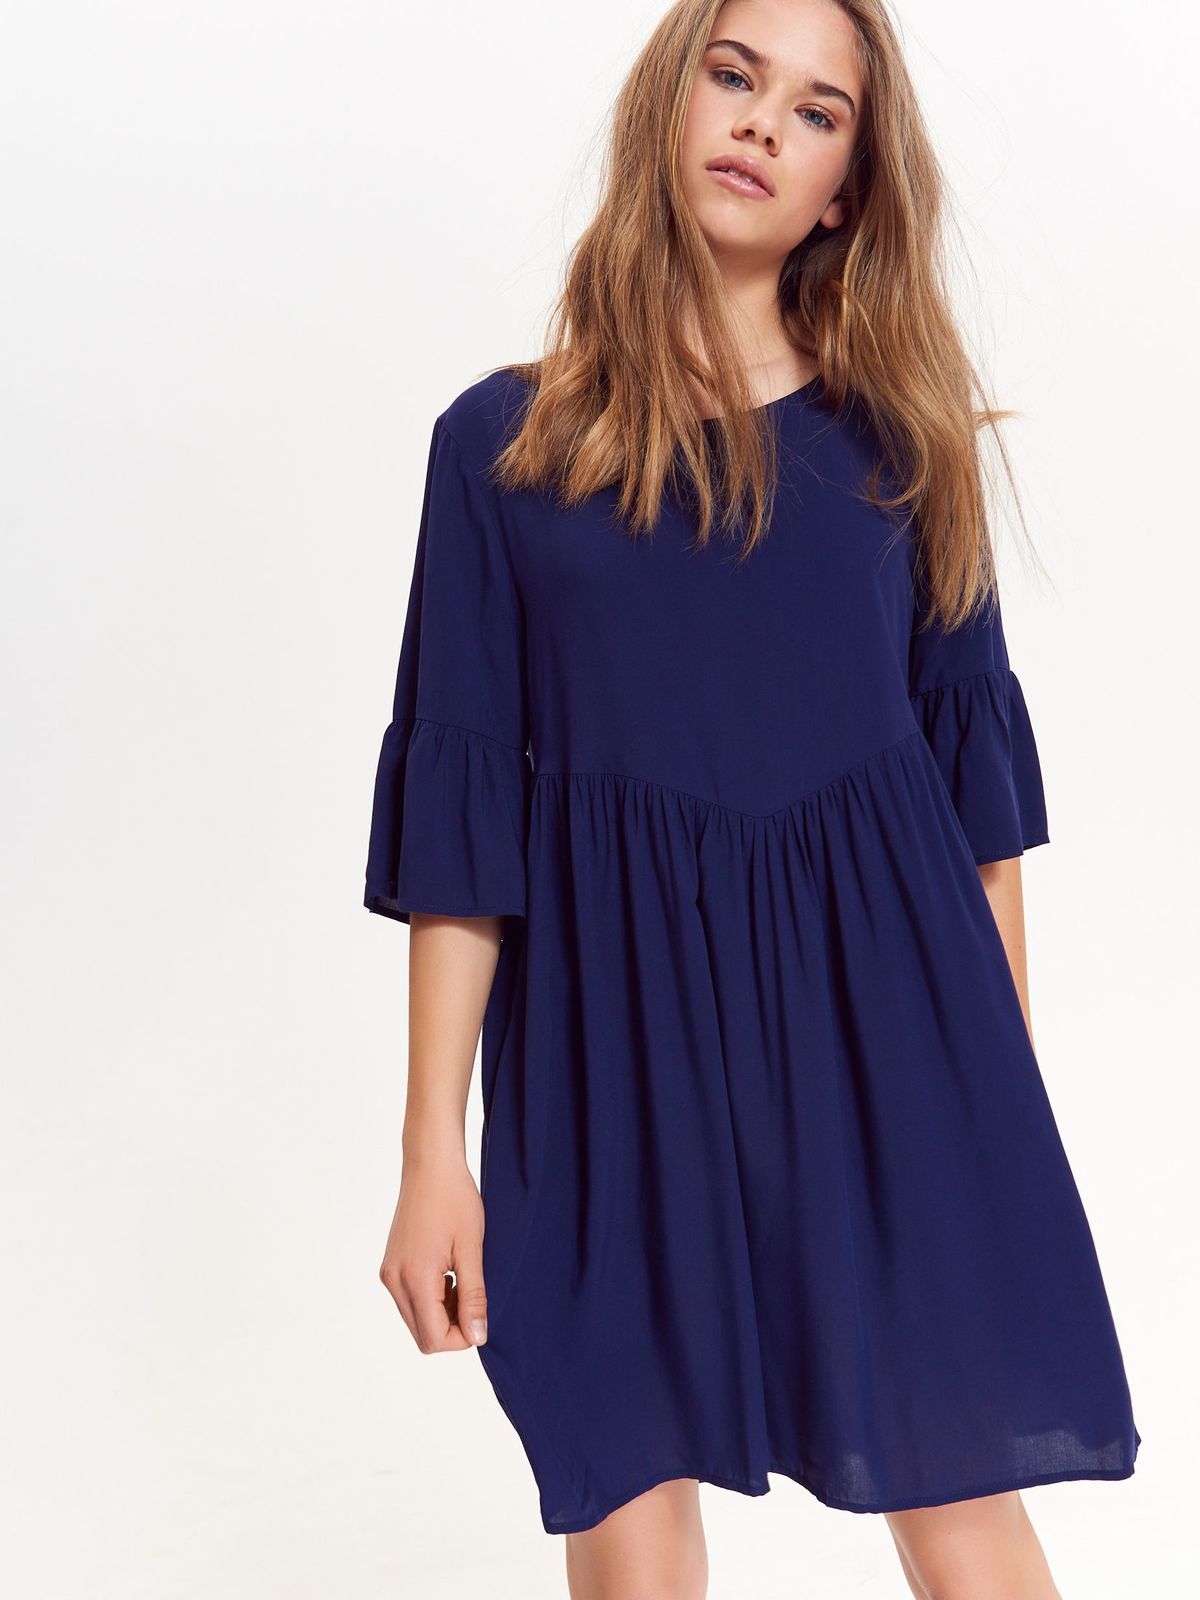 Top Secret darkblue casual flared dress airy fabric with inside lining ...